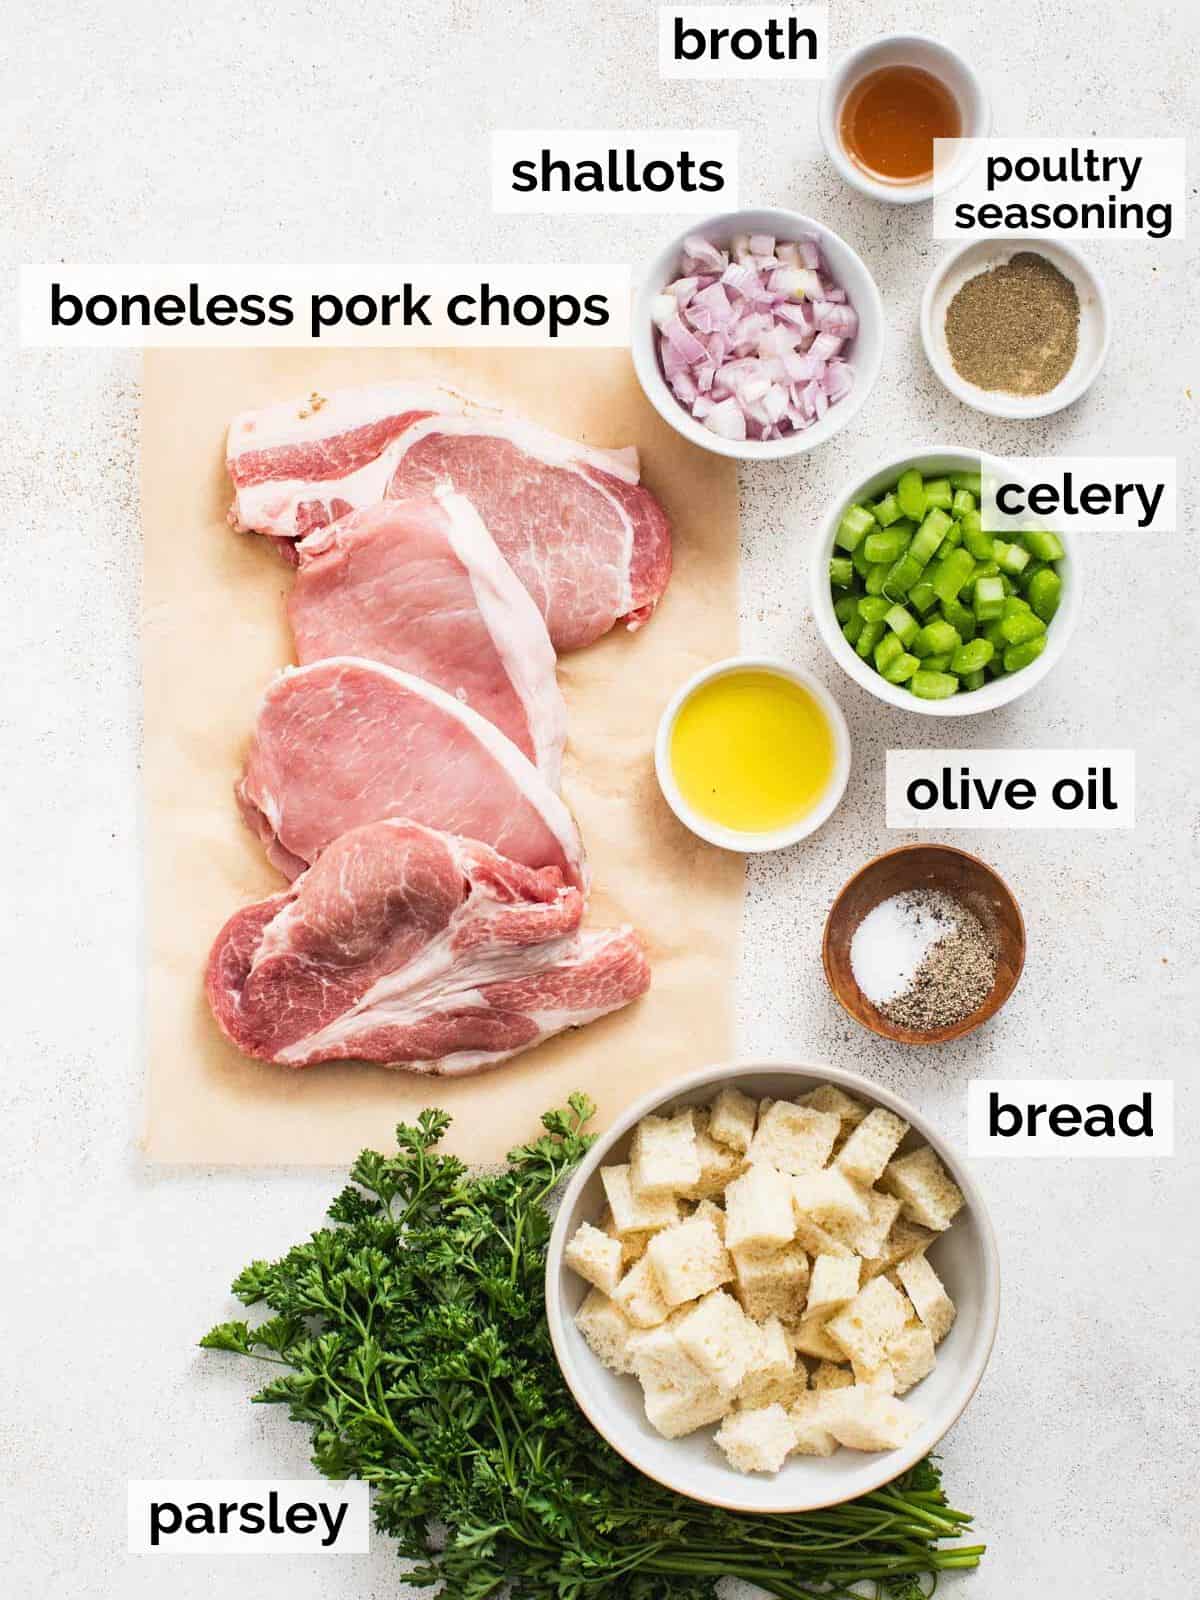 Ingredients for stuffed pork chops on a white background.